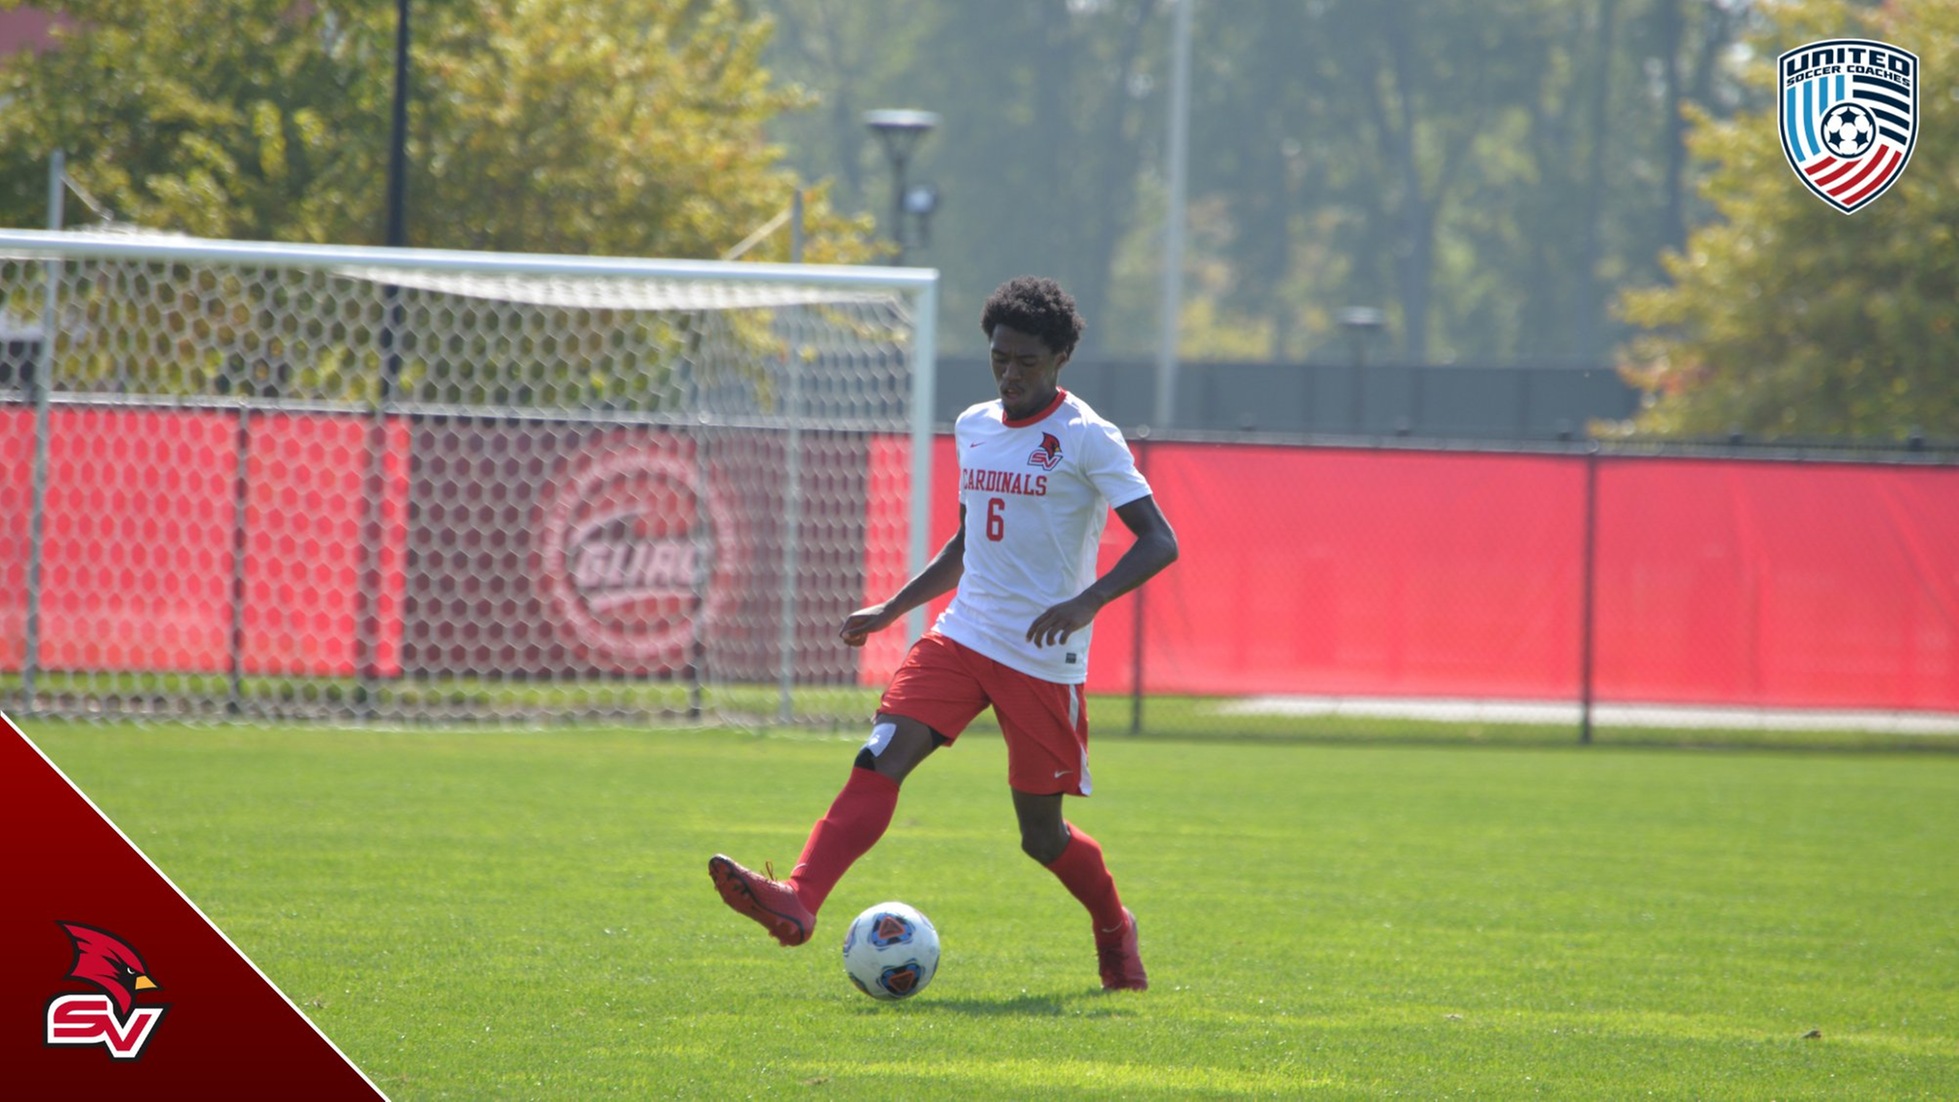 Omar Sinclair Named United Soccer Coaches All-American